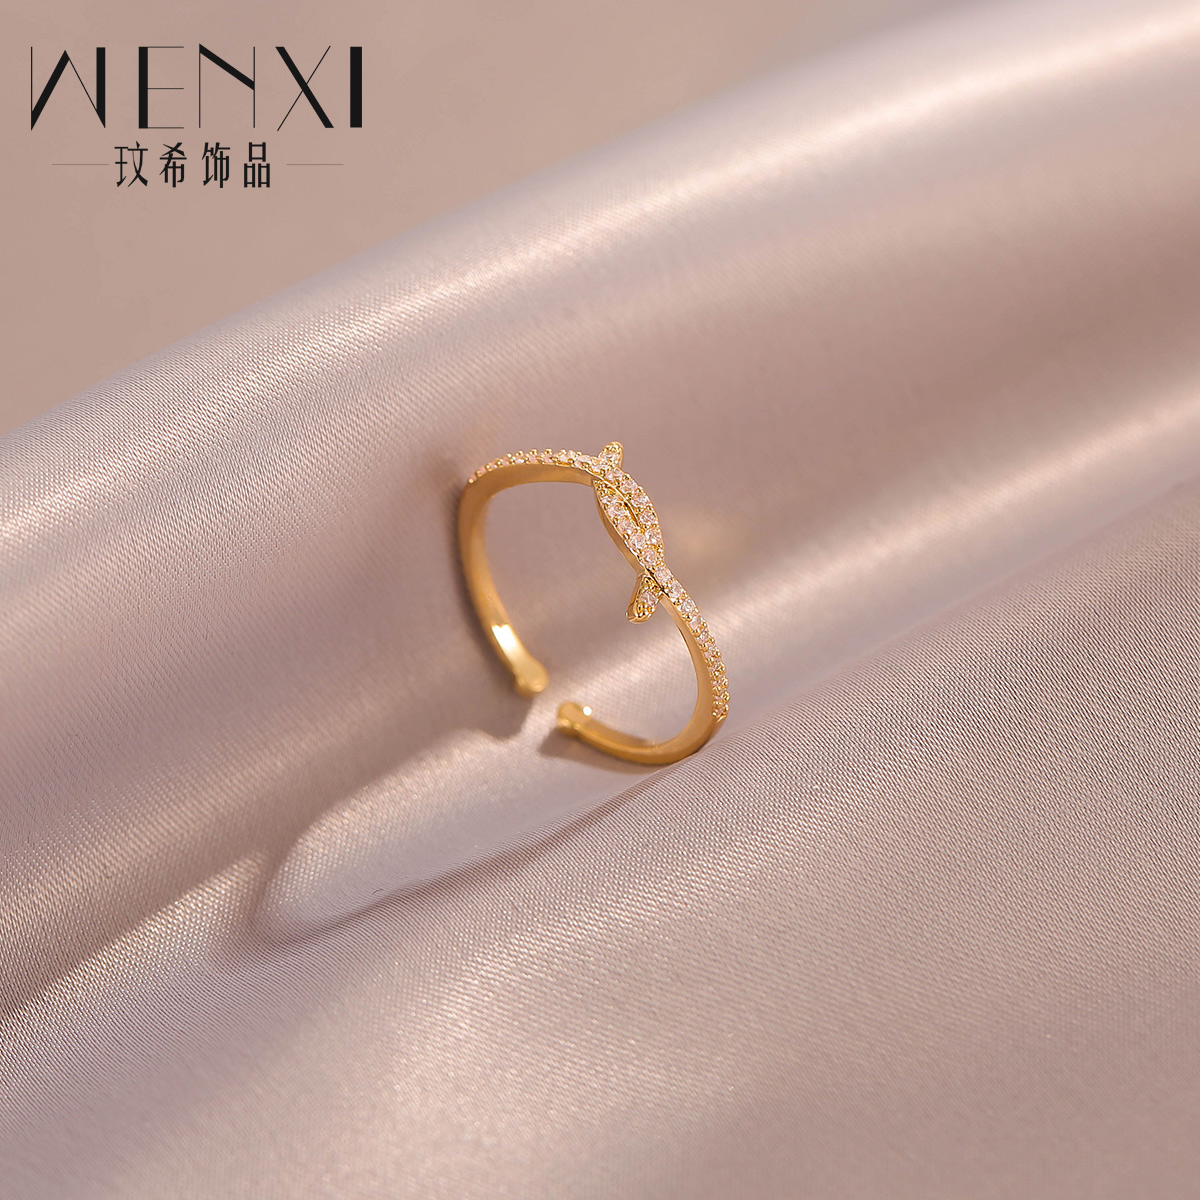 Zhou Yutong's Same Ring for Women's Light Luxury and Small Form Design, High Grade Feeling Index Finger Ring, 2023 New Trendy and Simple Ring